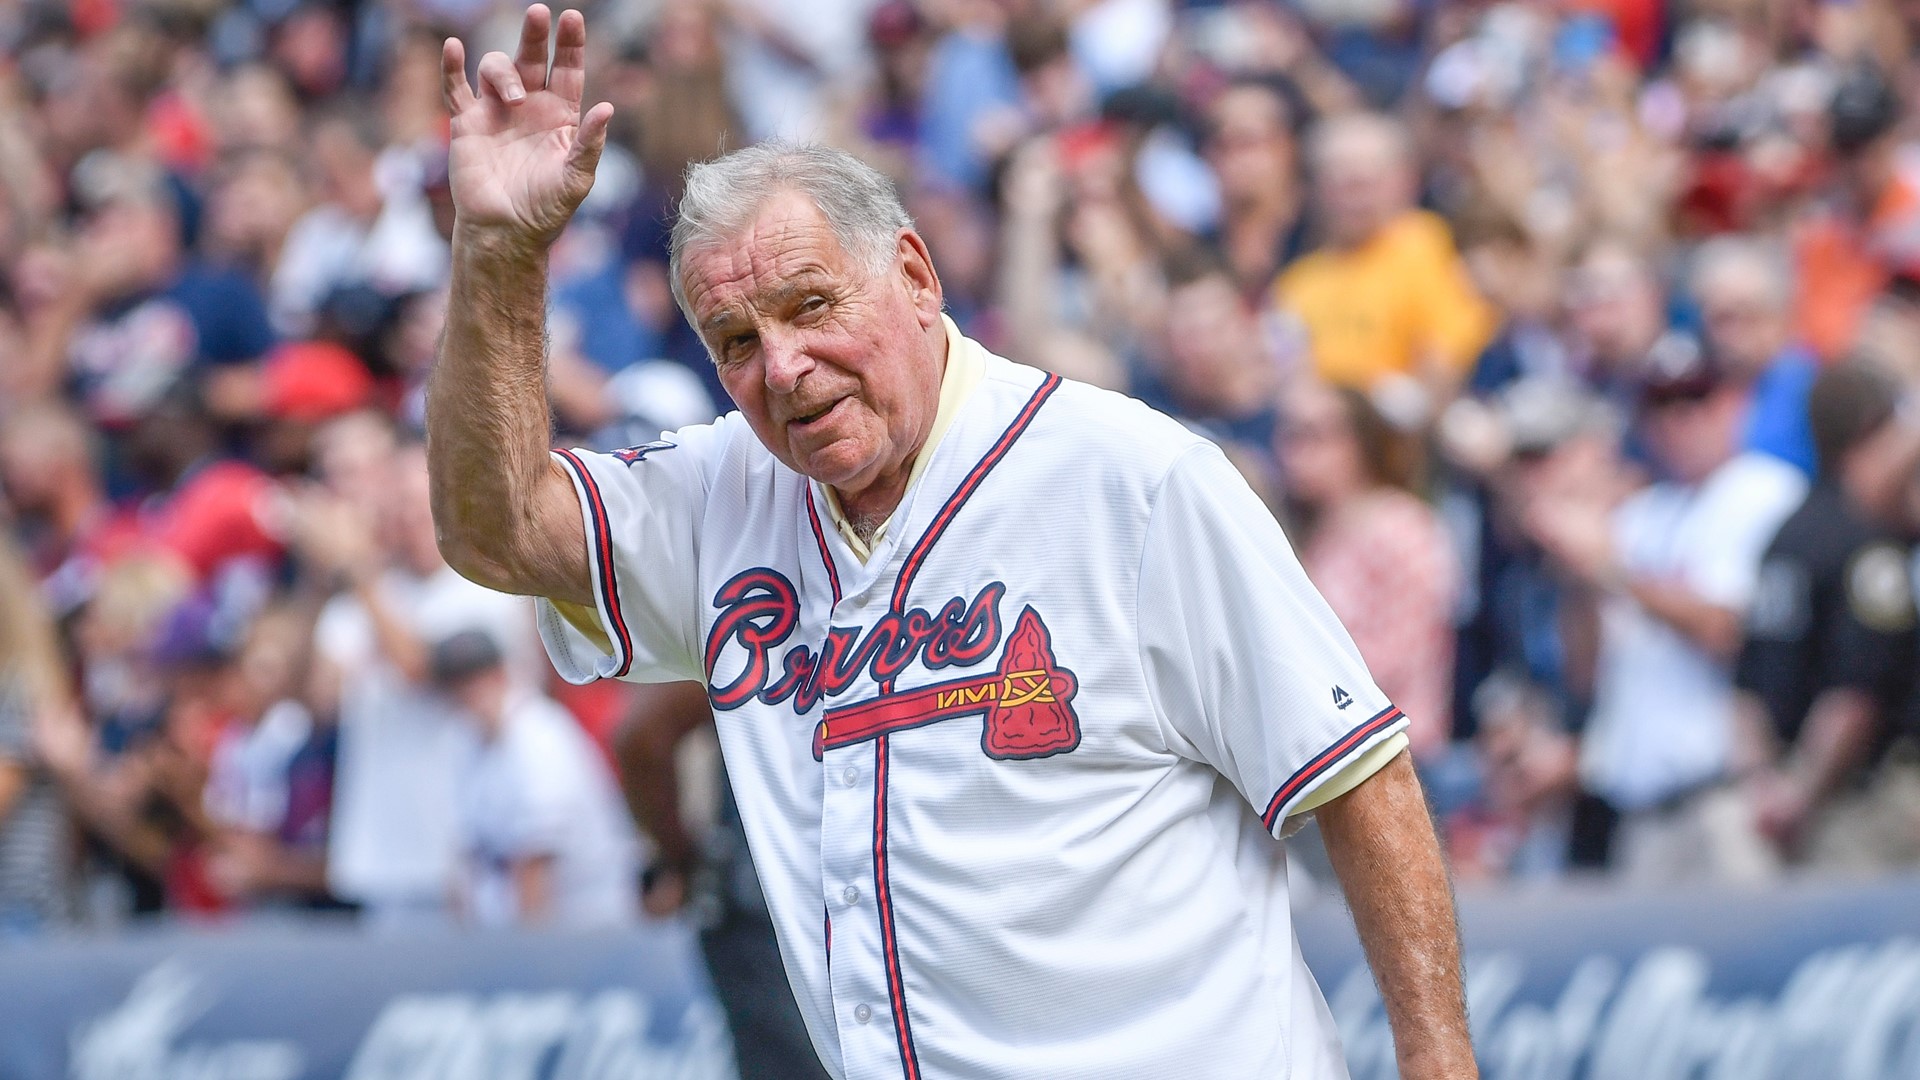 Cox, who suffered a stroke on Monday, managed the Braves during their dynastic period of 1991-2004 -- collecting 14 division titles and one World Series crown.